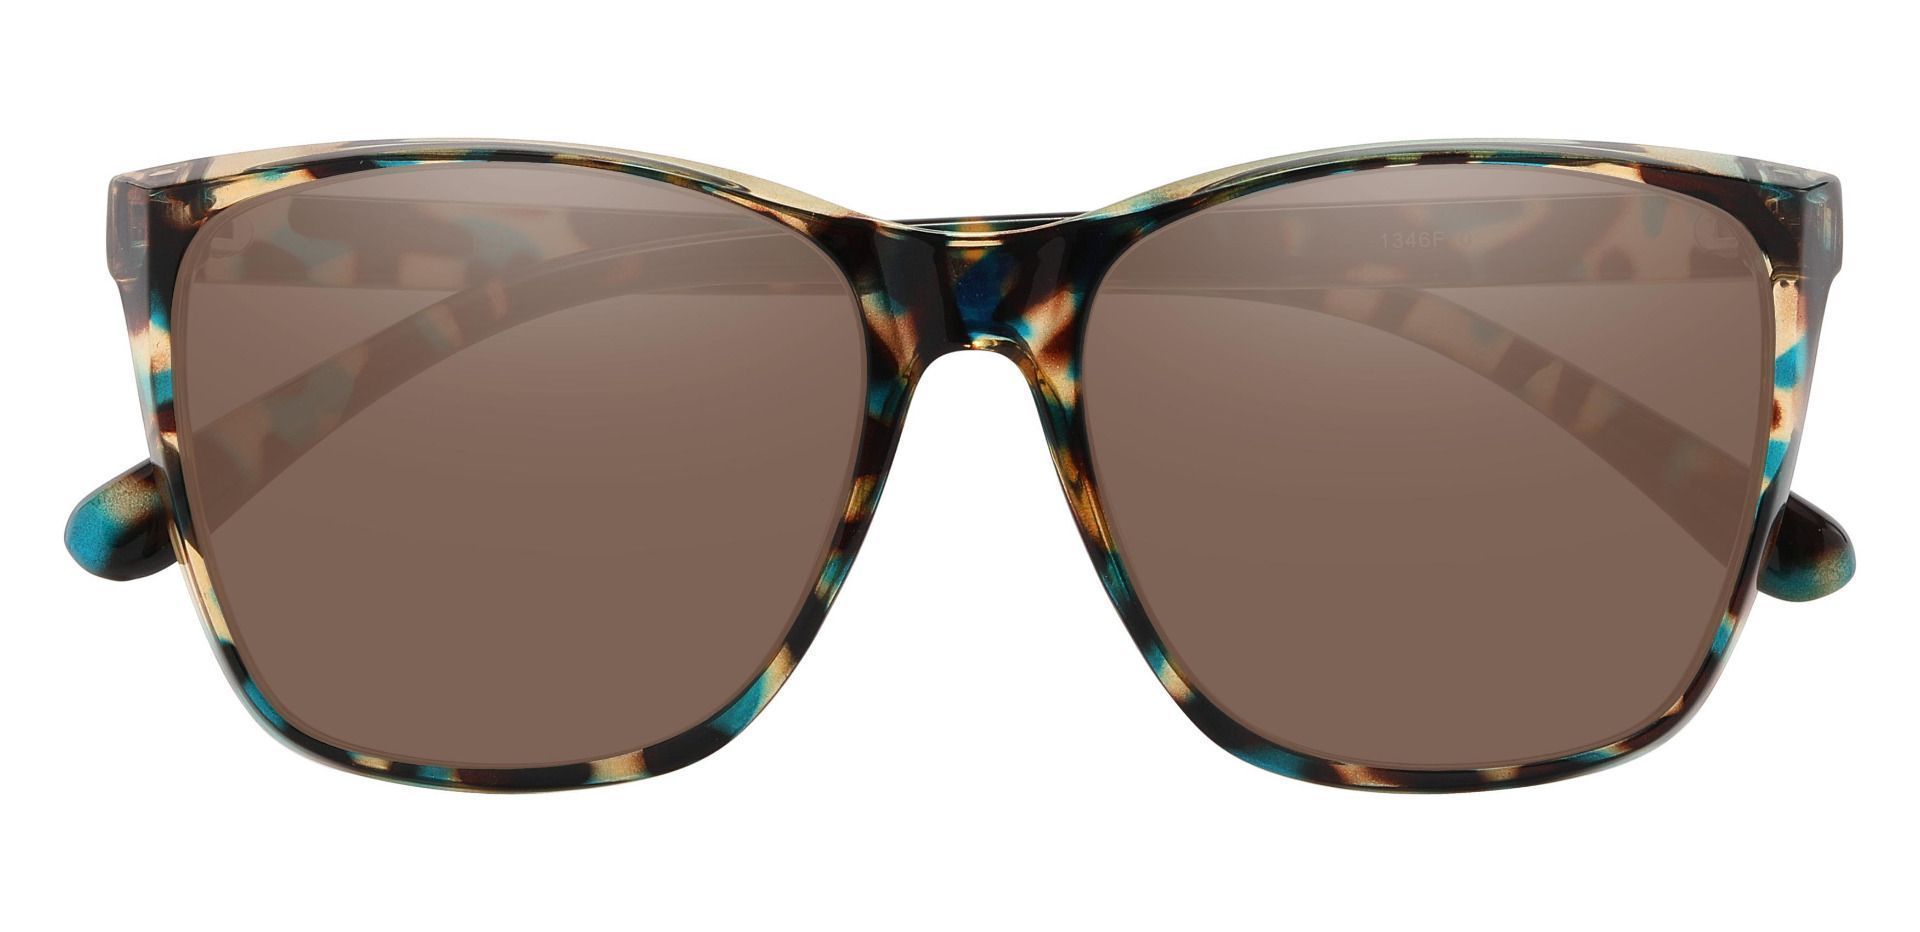 Taryn Square Prescription Sunglasses - Floral Frame With Brown Lenses